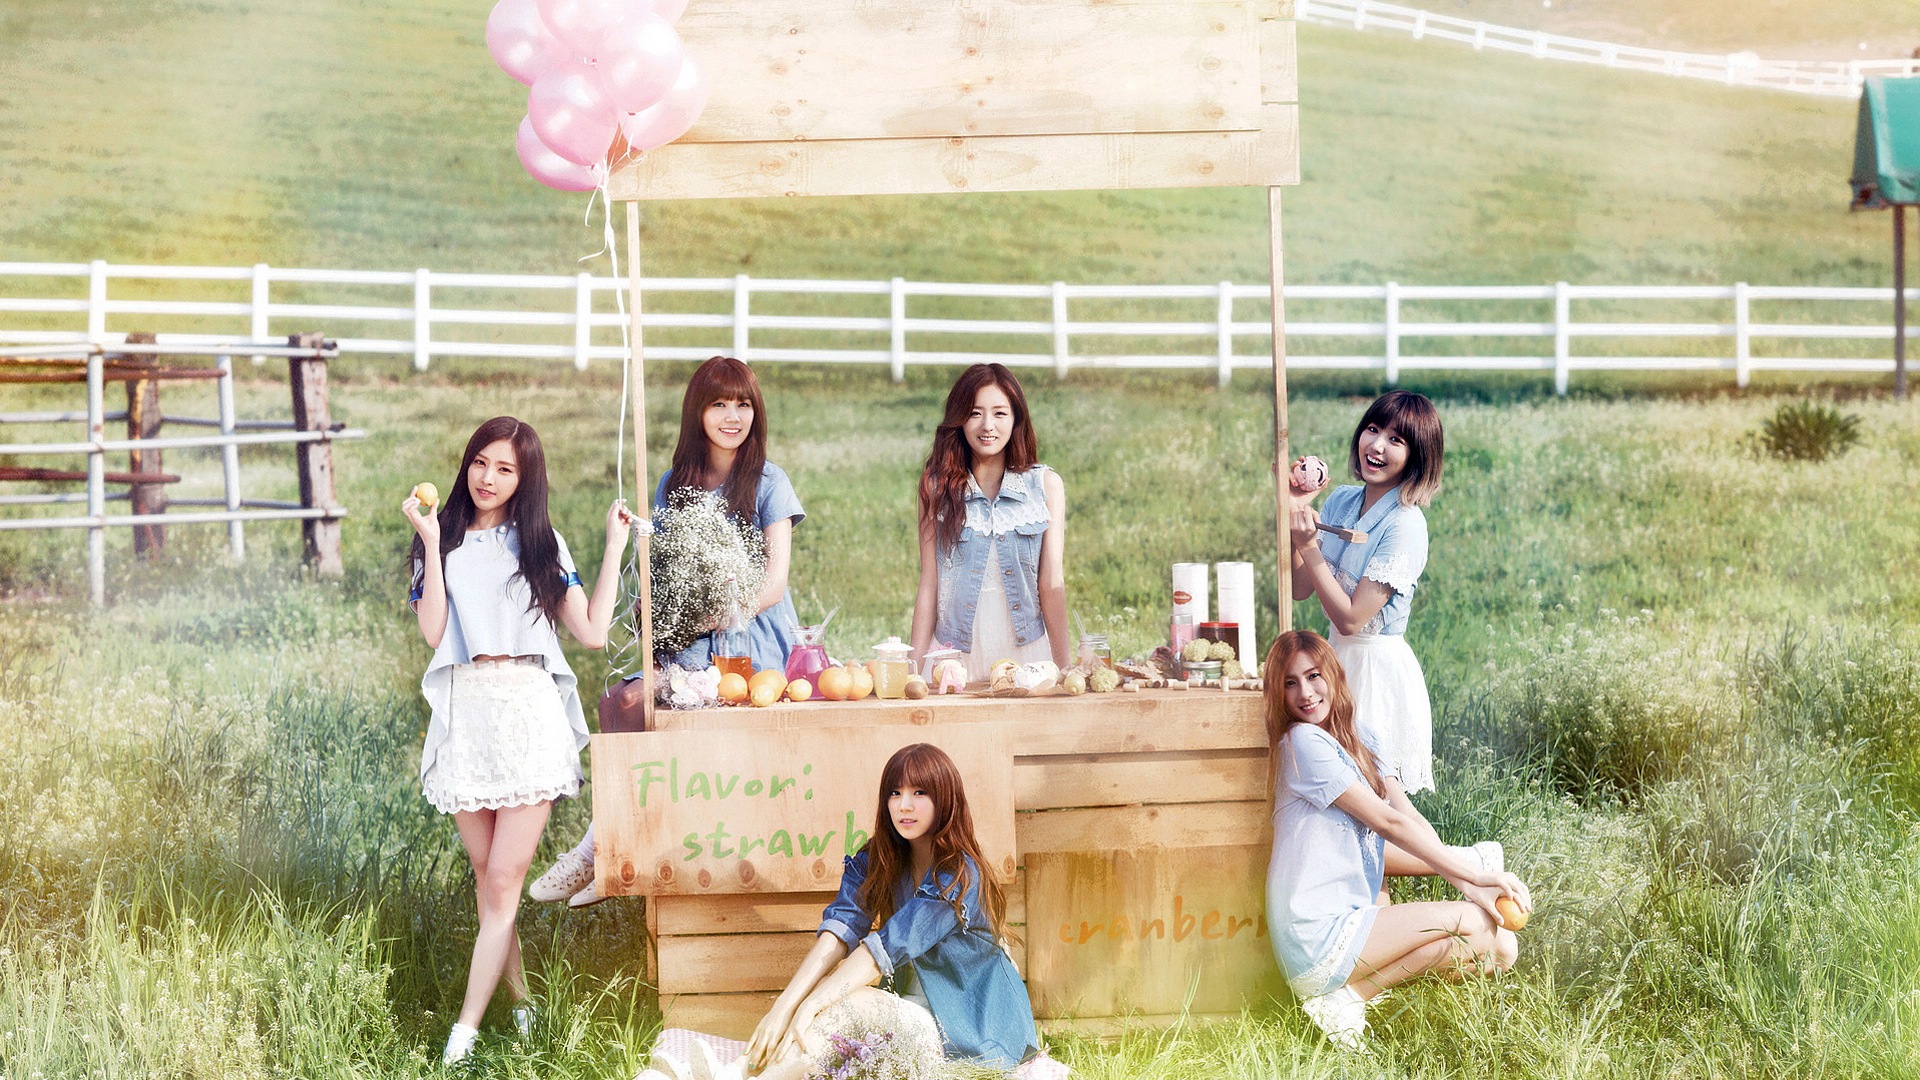 Apink 1920X1080 Wallpapers